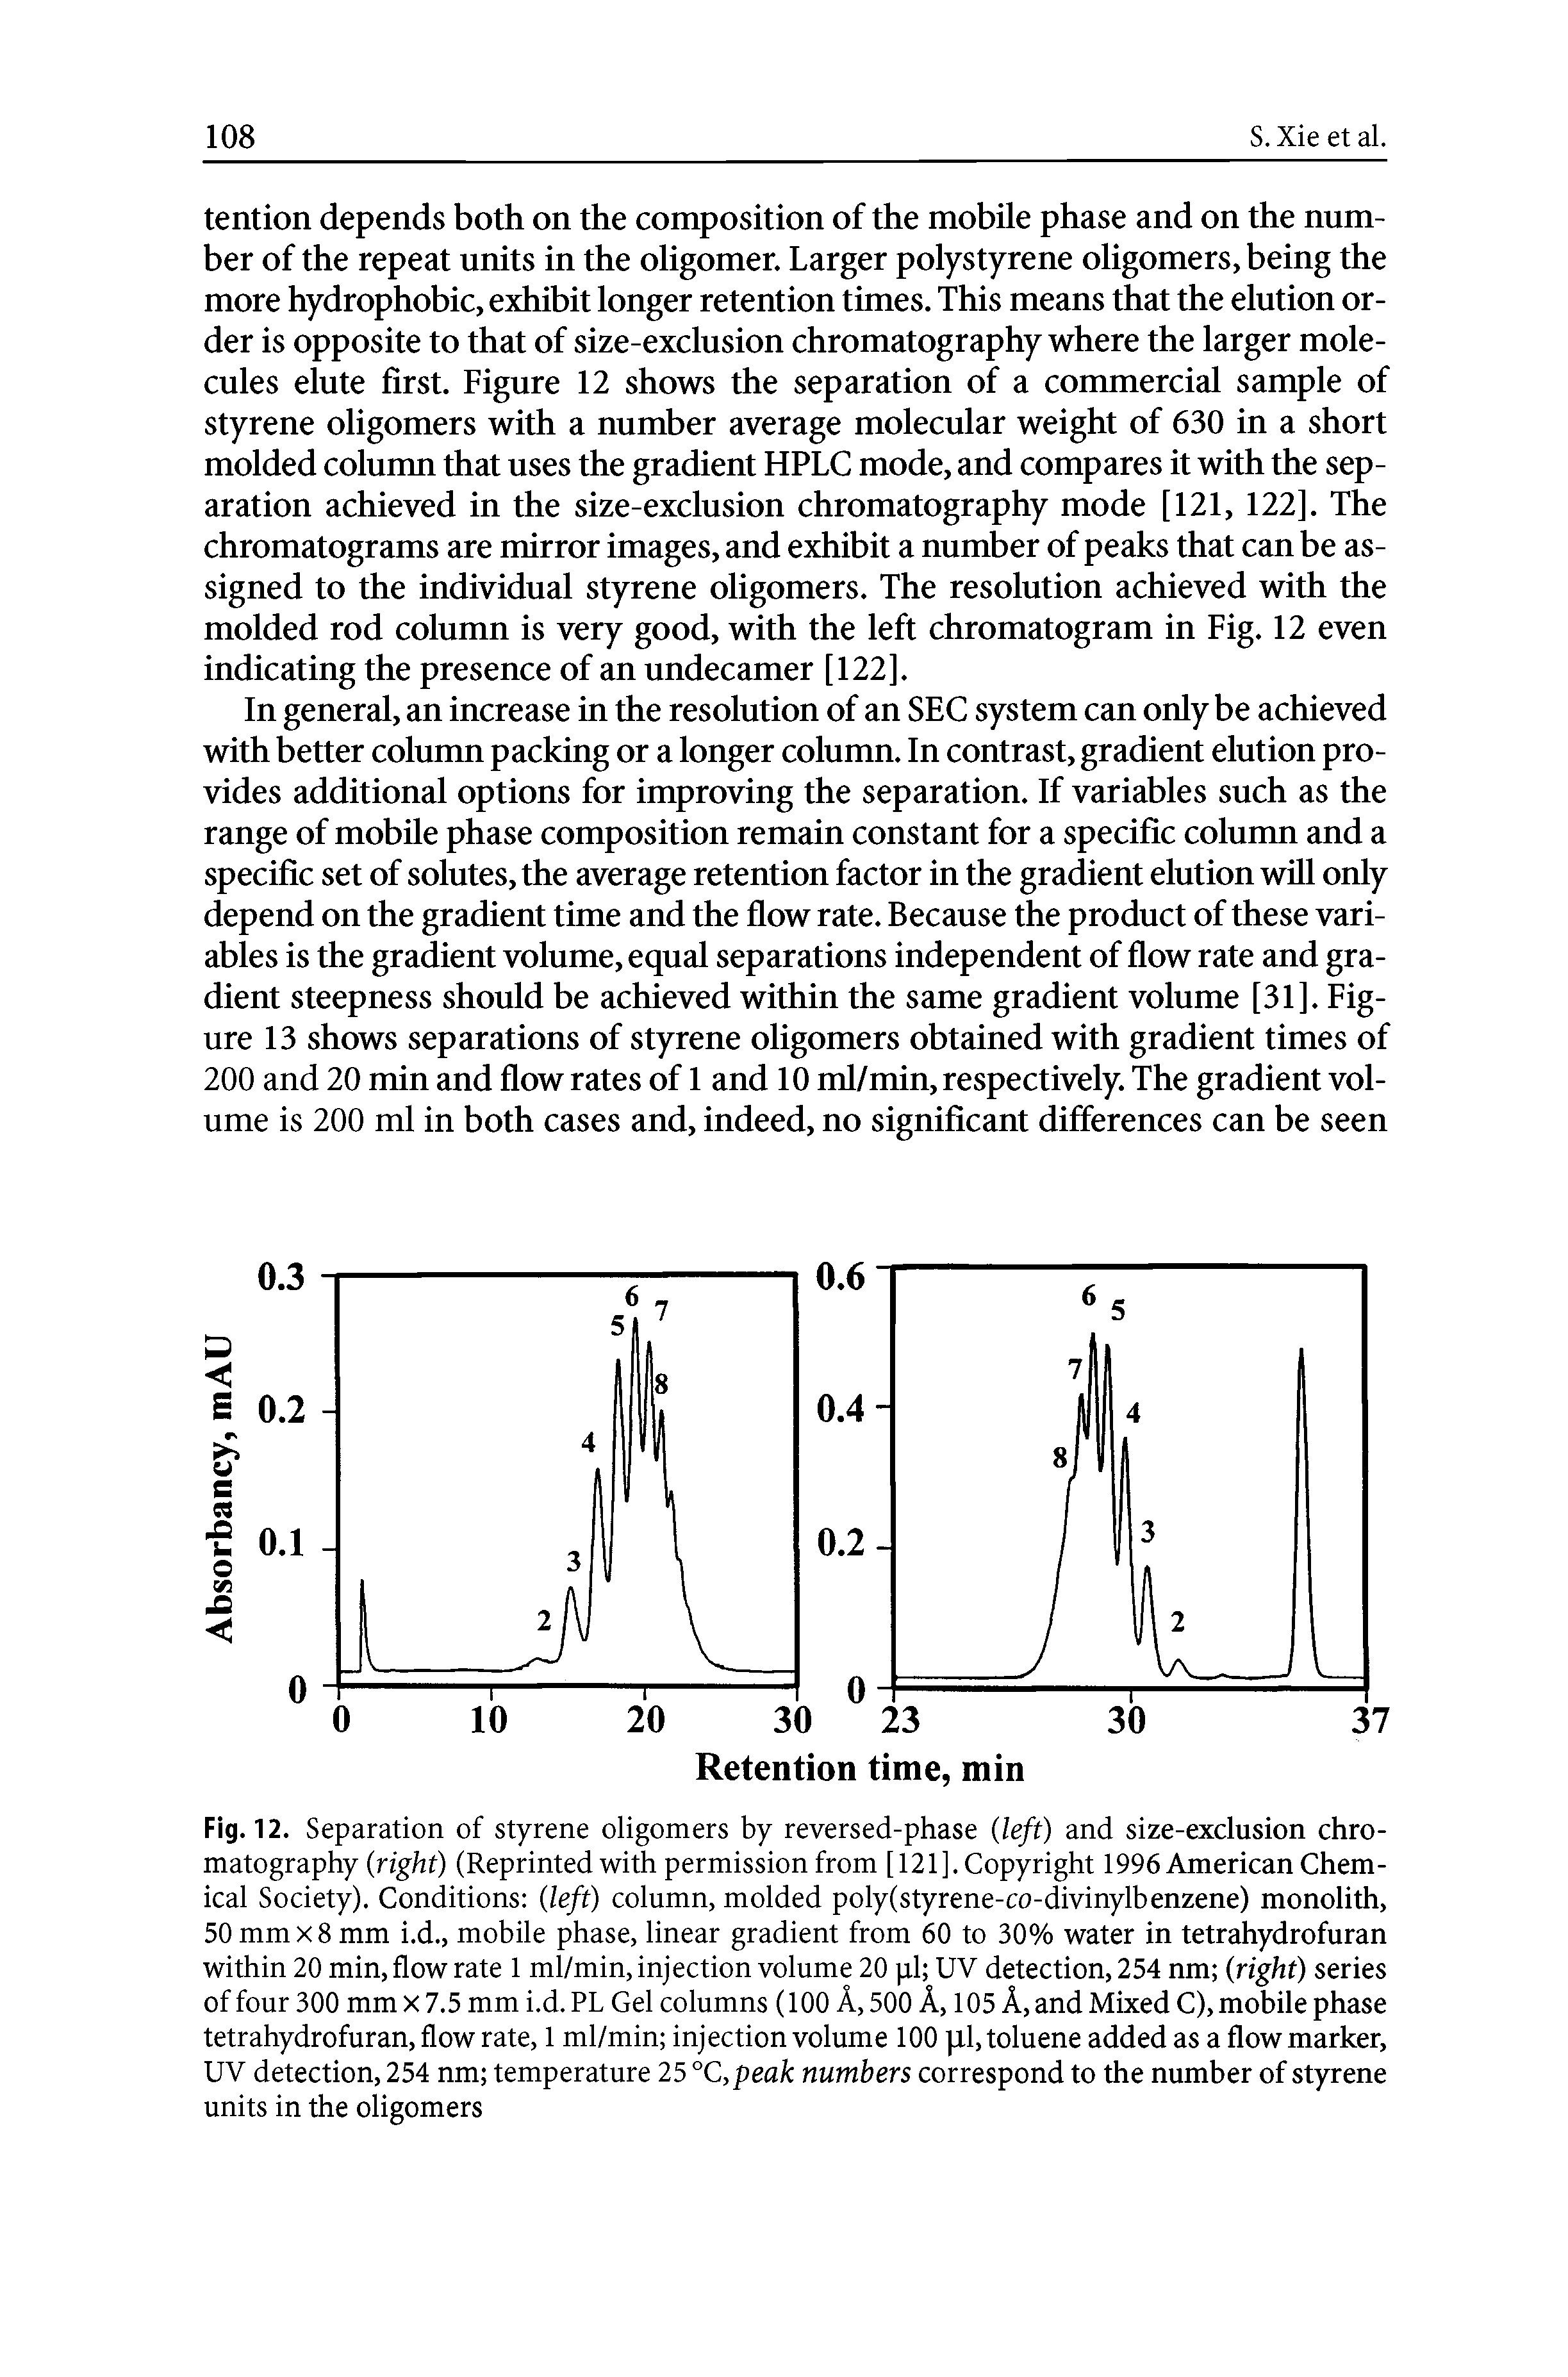 Fig. 12. Separation of styrene oligomers by reversed-phase (left) and size-exclusion chromatography (right) (Reprinted with permission from [121]. Copyright 1996 American Chemical Society). Conditions (left) column, molded poly(styrene-co-divinylbenzene) monolith, 50 mm x 8 mm i.d., mobile phase, linear gradient from 60 to 30% water in tetrahydrofuran within 20 min, flow rate 1 ml/min, injection volume 20 pi UV detection, 254 nm (right) series of four 300 mm x 7.5 mm i.d. PL Gel columns (100 A, 500 A, 105 A, and Mixed C), mobile phase tetrahydrofuran, flow rate, 1 ml/min injection volume 100 pi, toluene added as a flow marker, UV detection, 254 nm temperature 25 °C,peak numbers correspond to the number of styrene units in the oligomers...